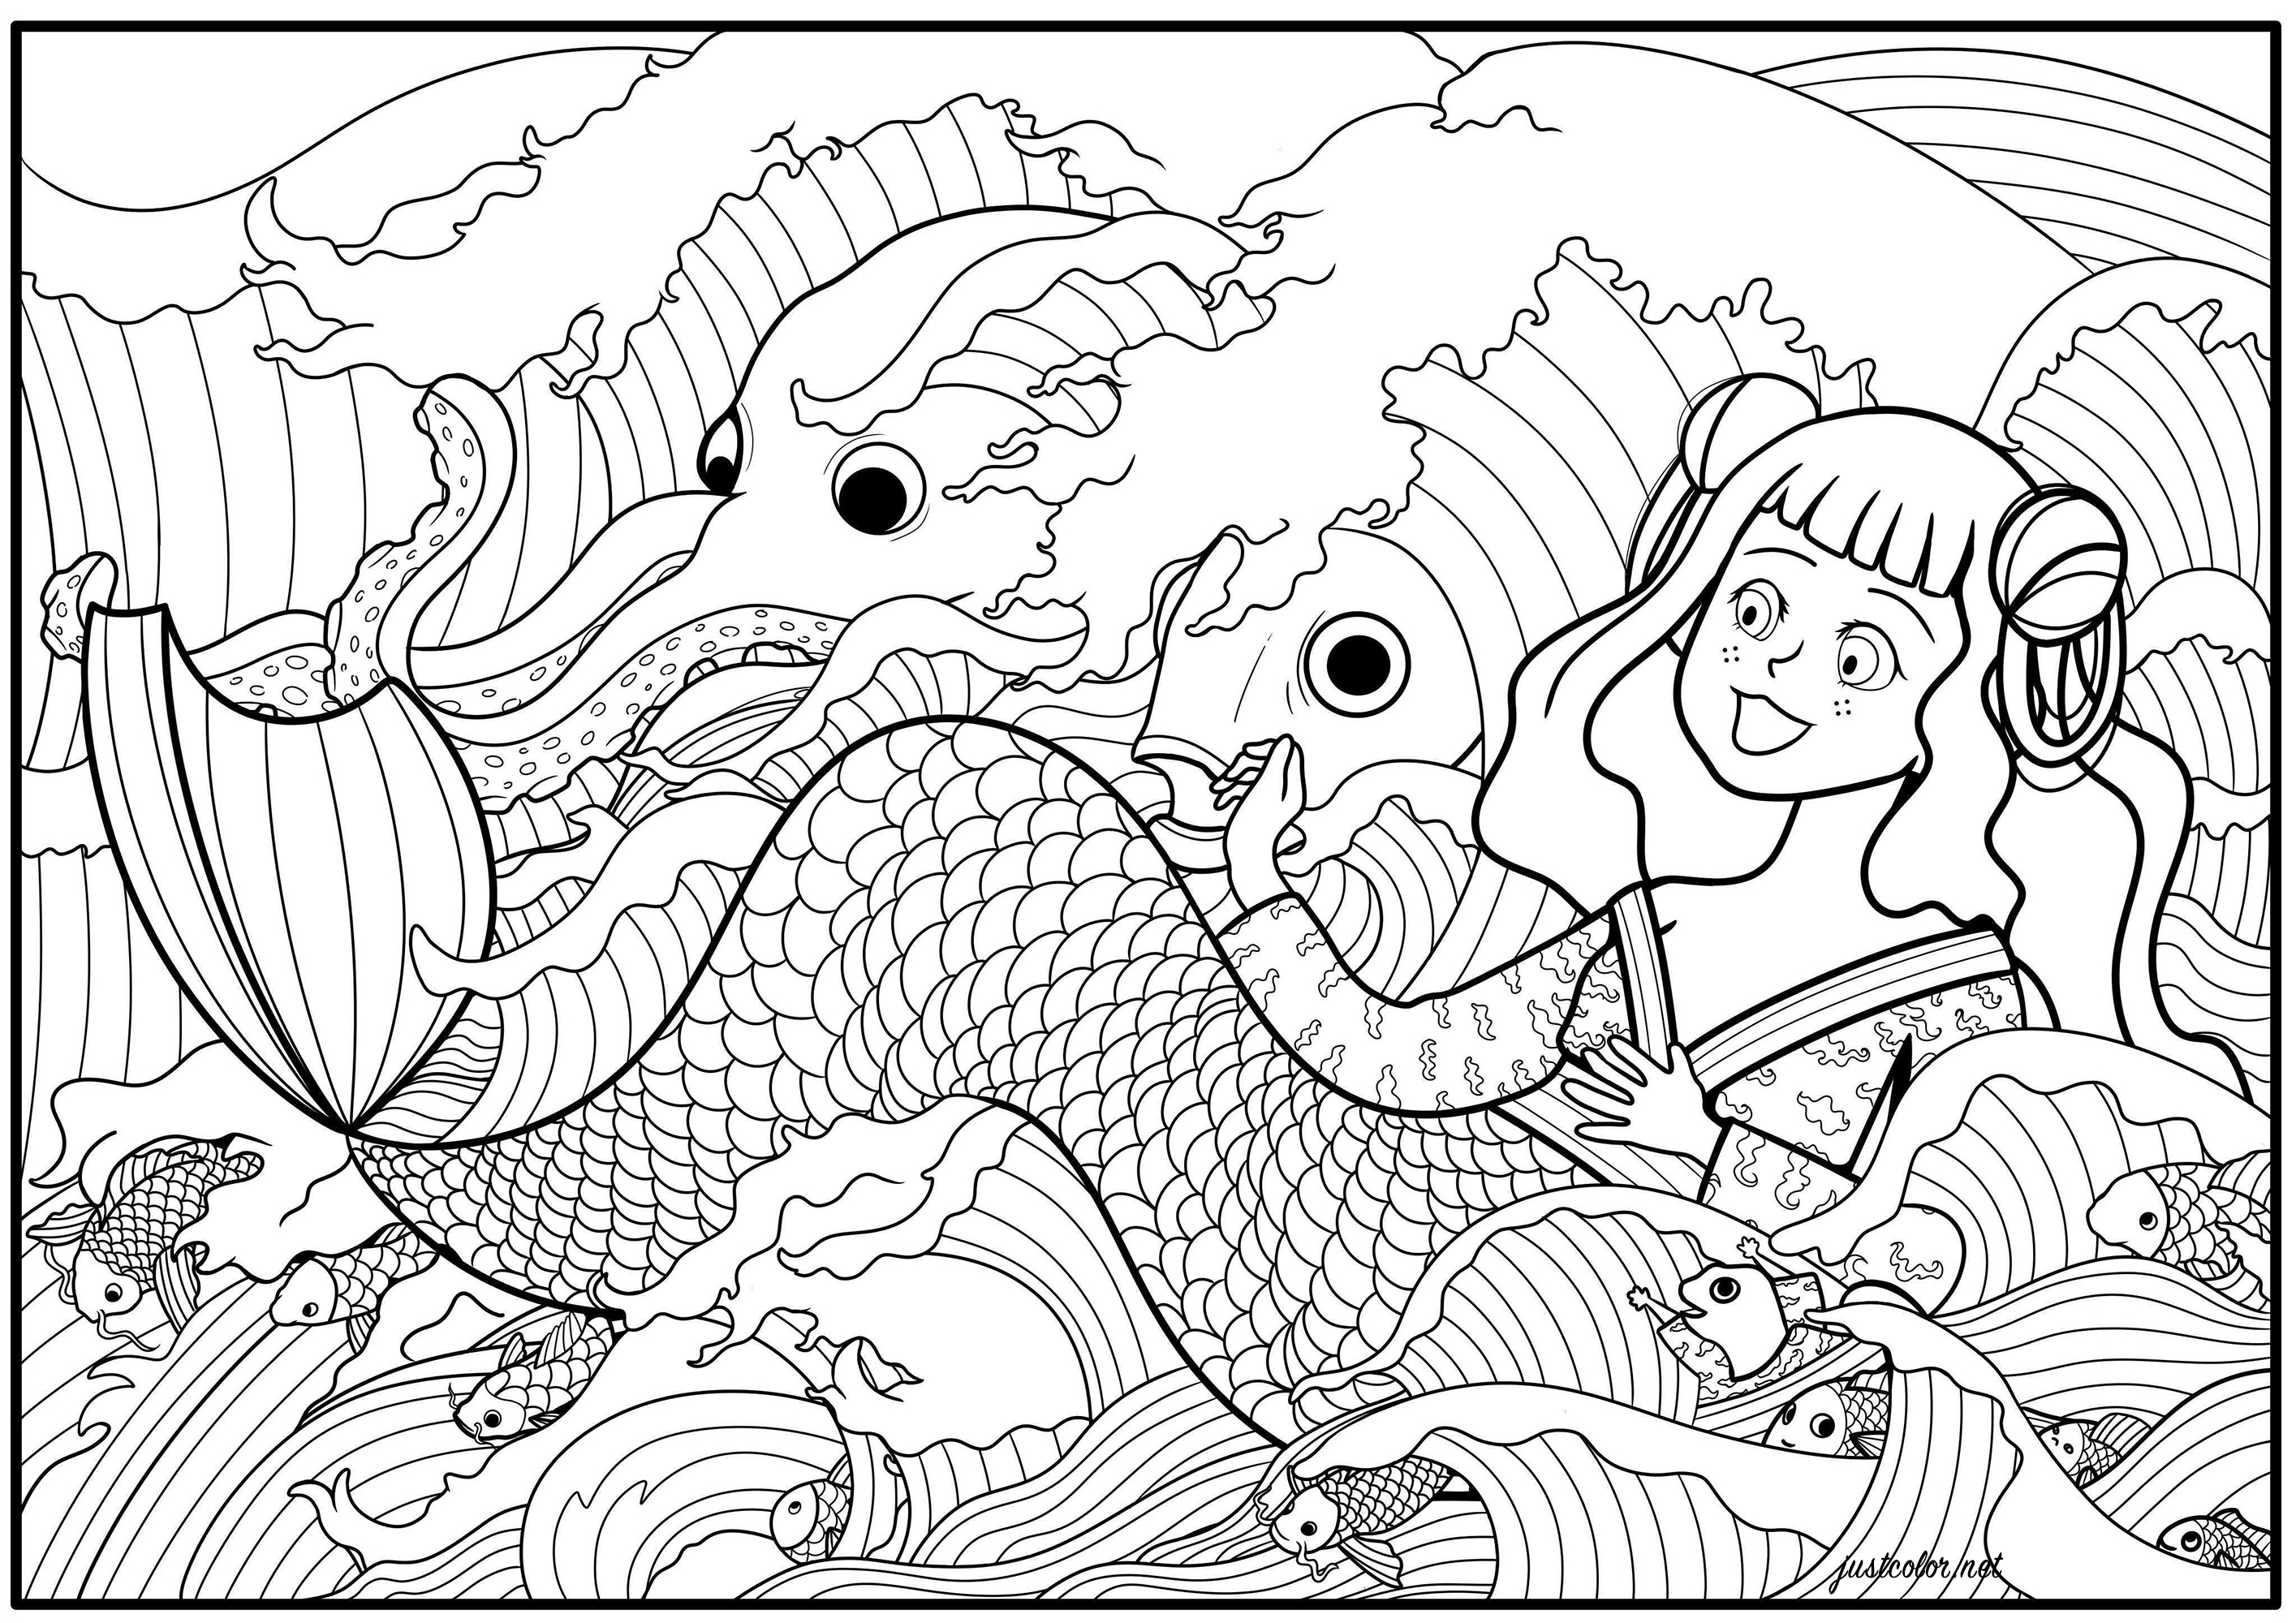 This coloring represents a mermaid surrounded by waves and marines animals. .  This is a reinterpretation of an illustration by Benjamin Lacombe